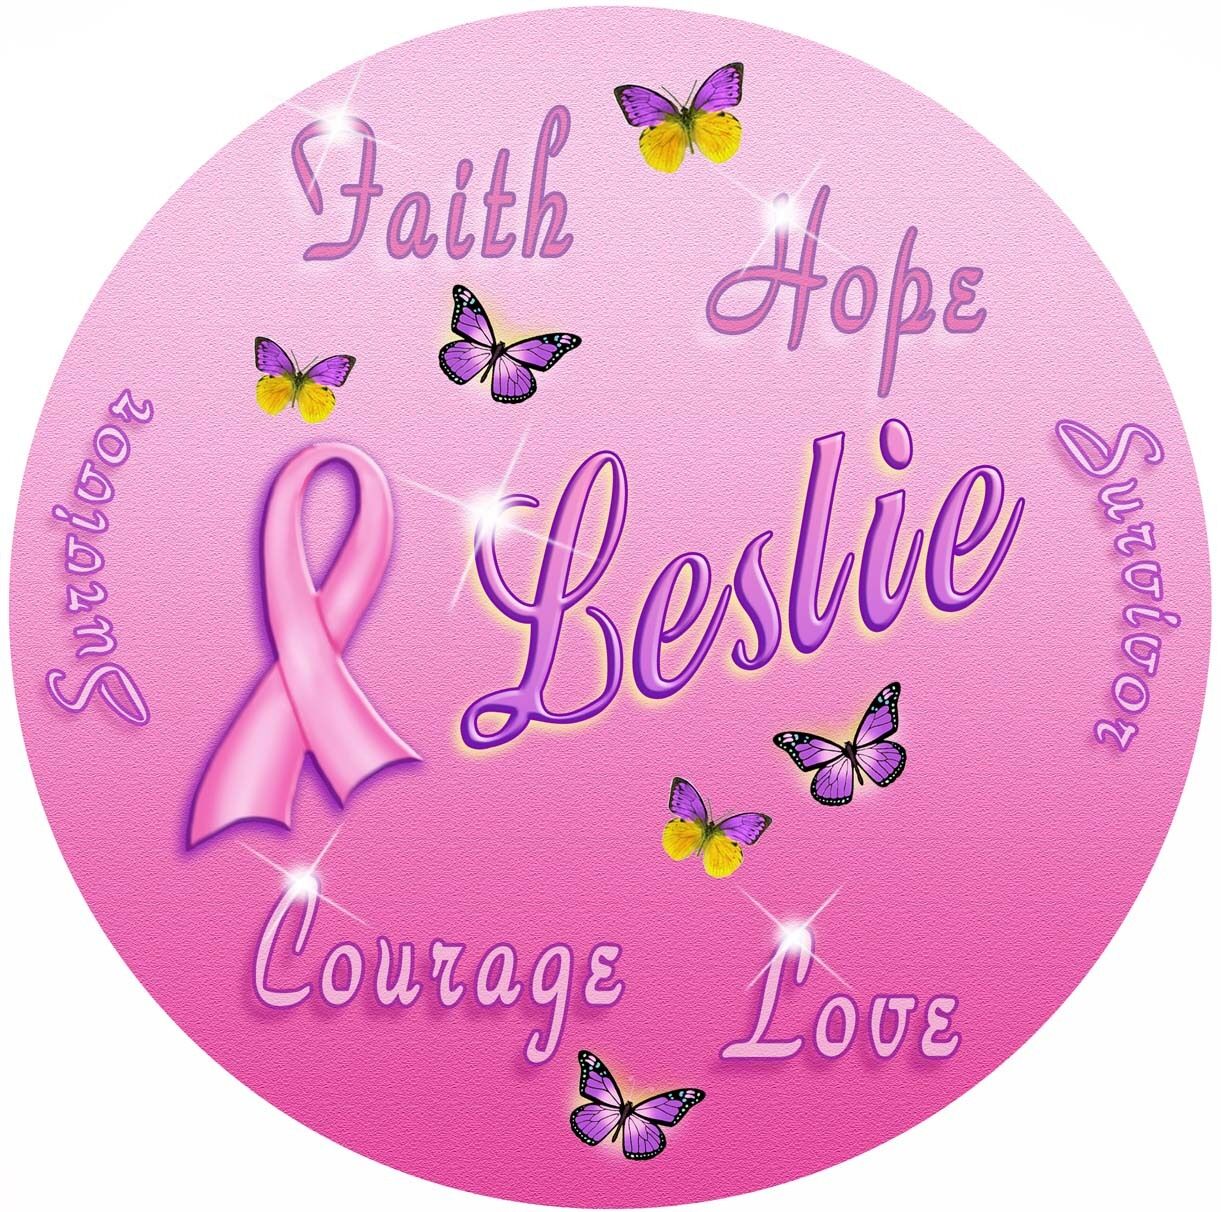 Breast Cancer Survivor Butterflies Round Mouse Pad Personalize Gifts Ladies Pink